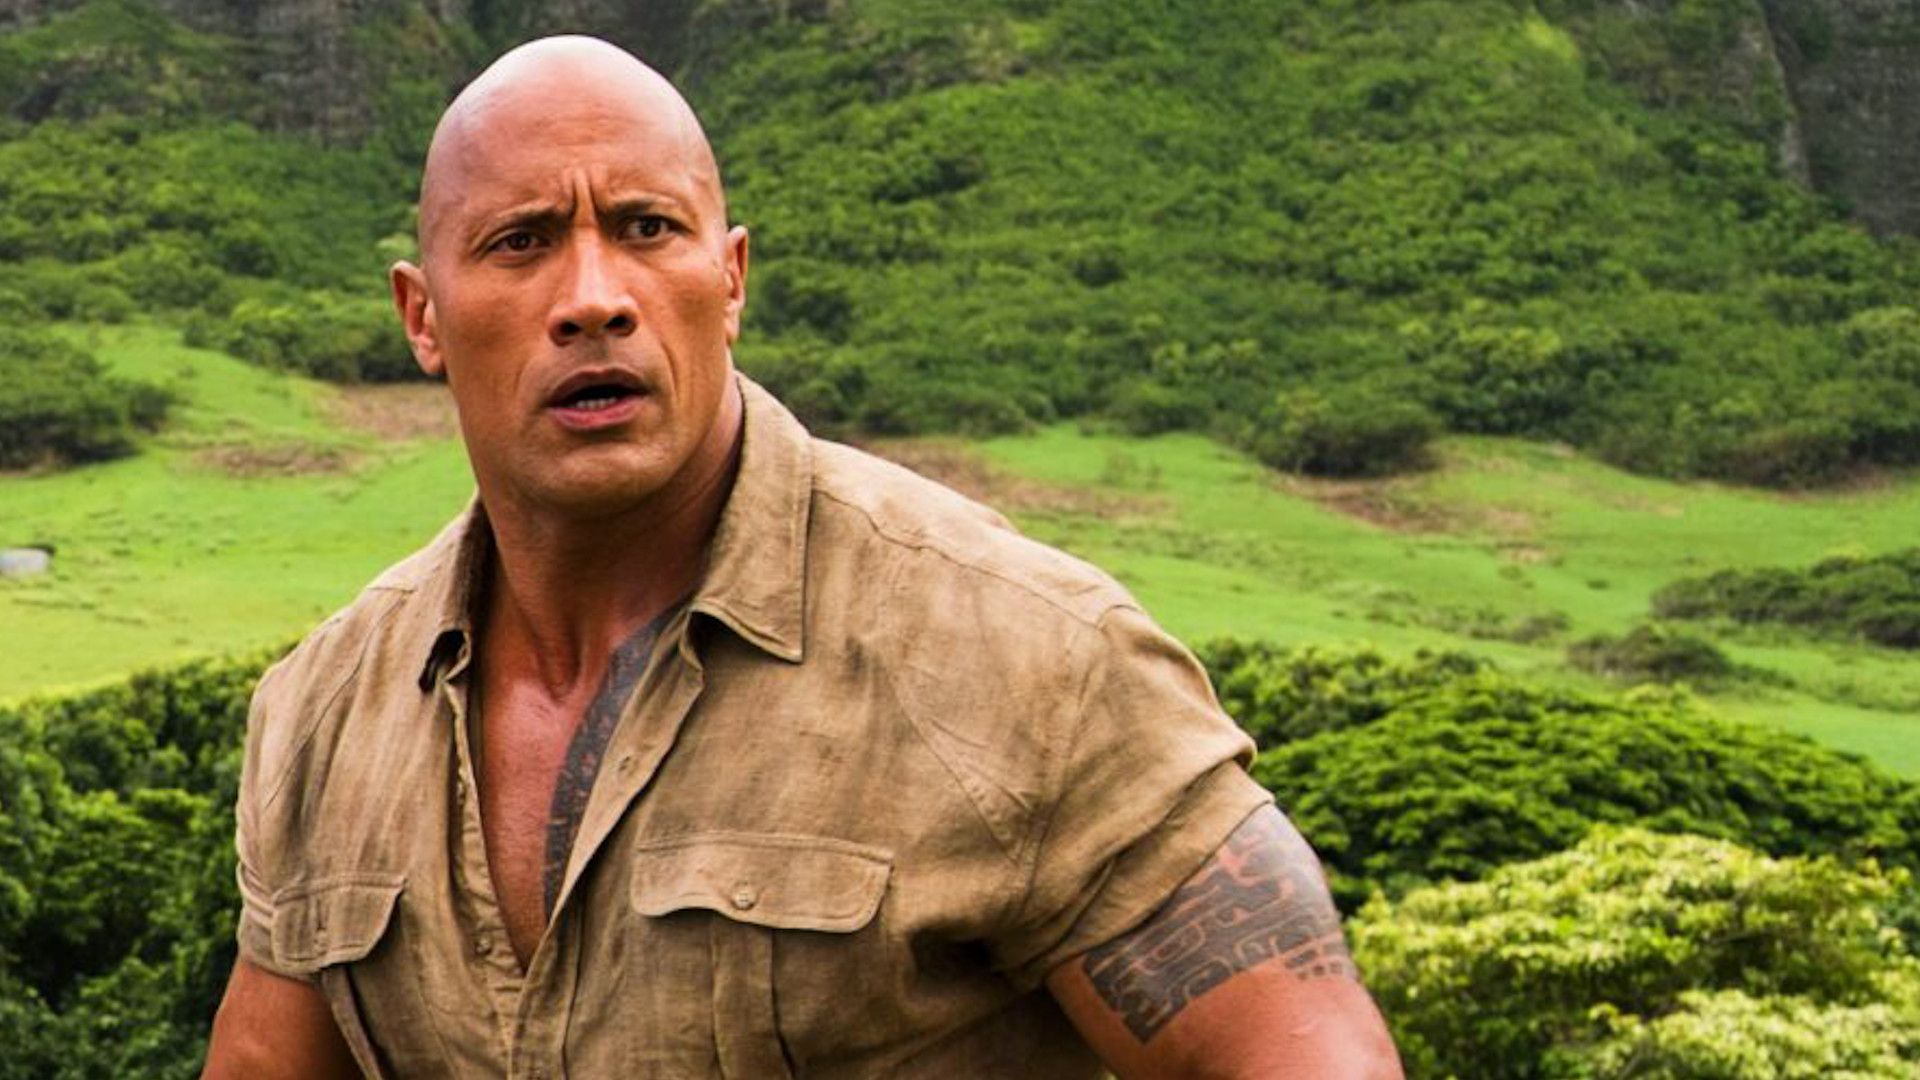 Dwayne Johnson in Jumanji: Welcome to the Jungle looking worried.